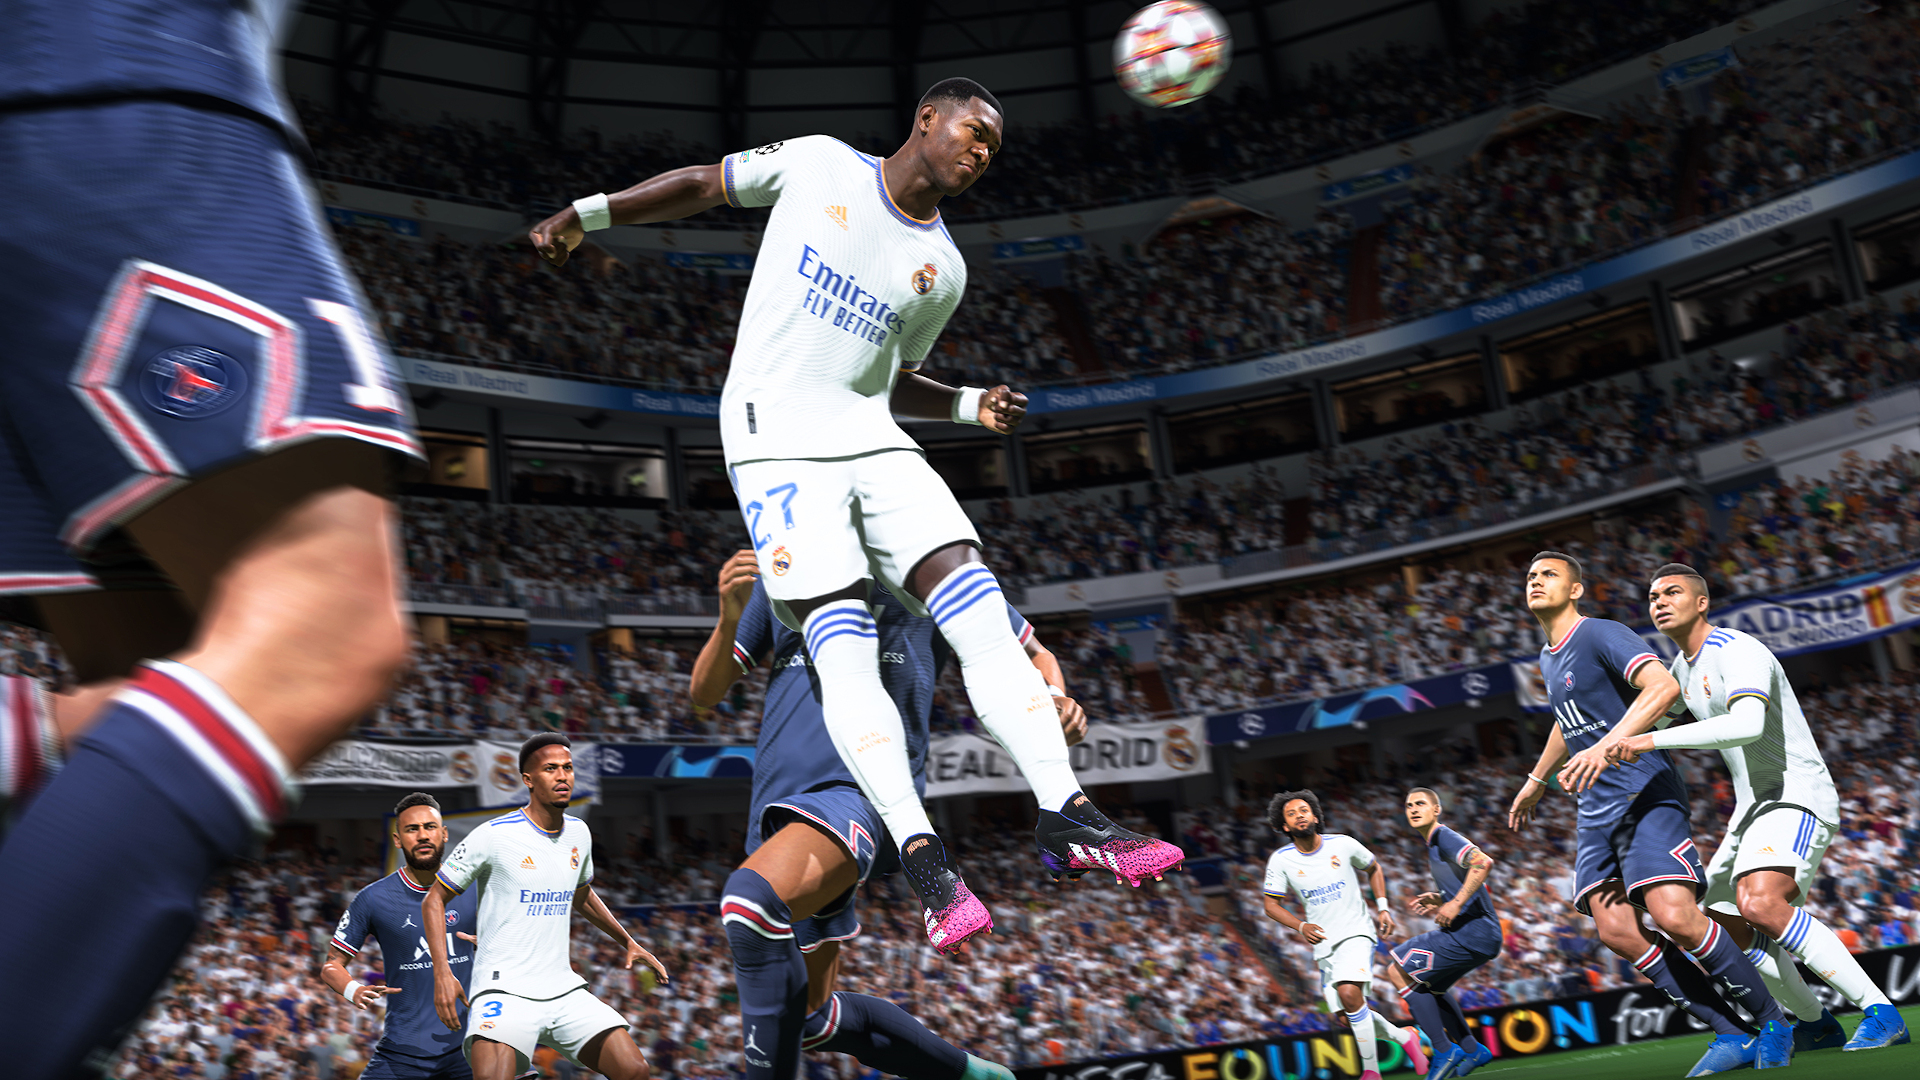 FIFA 22 release date: Alaba jumps up and heads a ball.